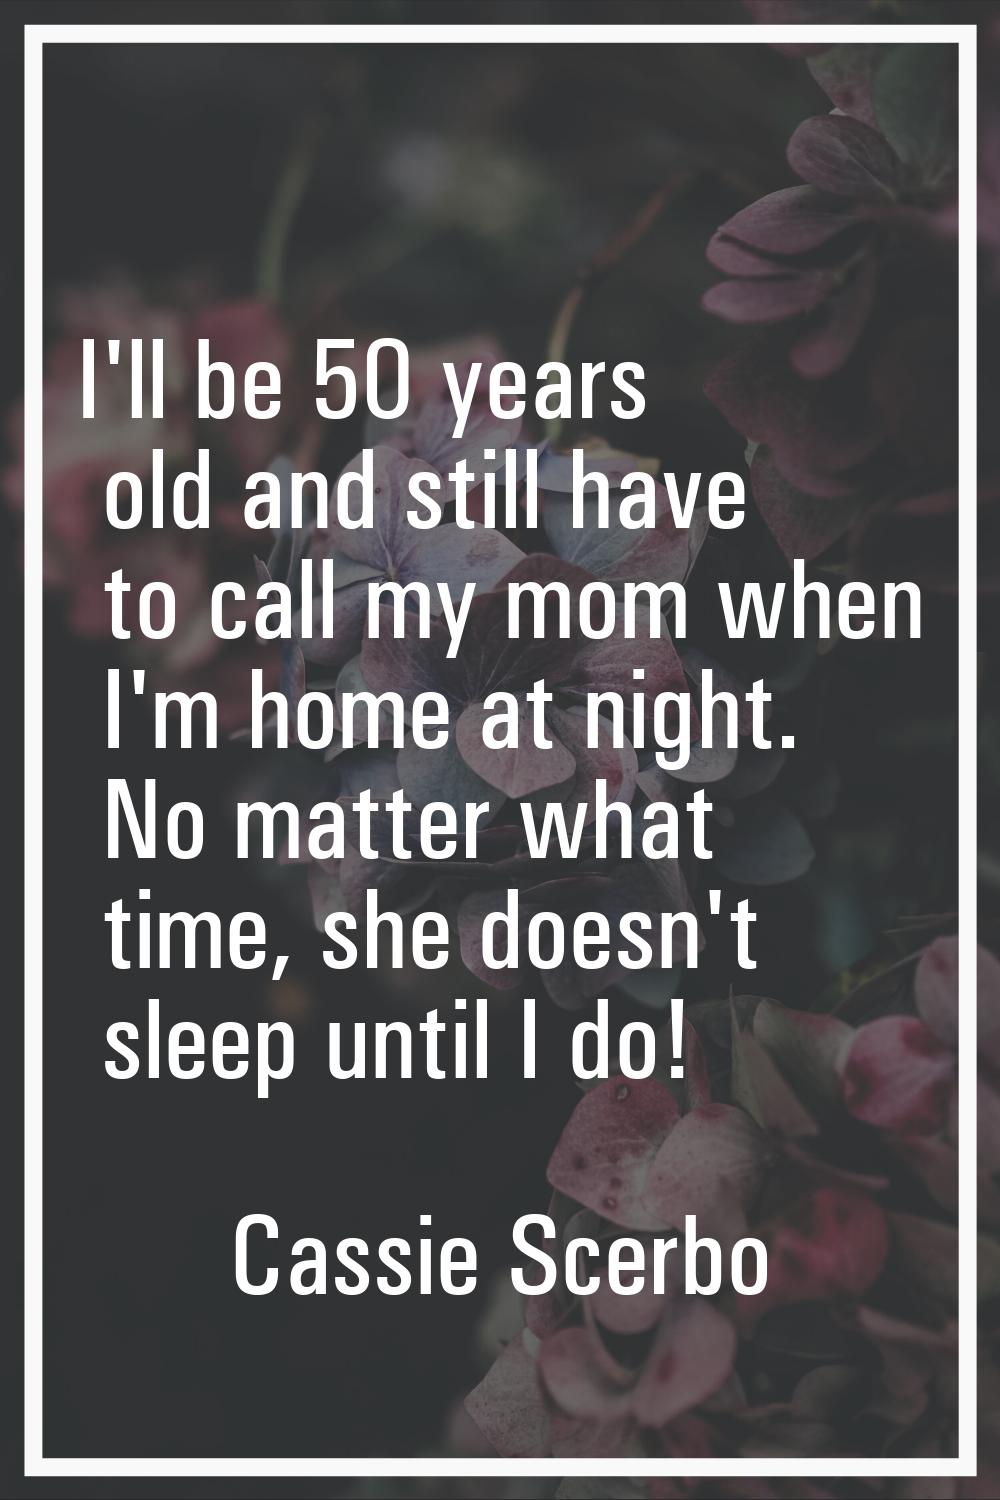 I'll be 50 years old and still have to call my mom when I'm home at night. No matter what time, she